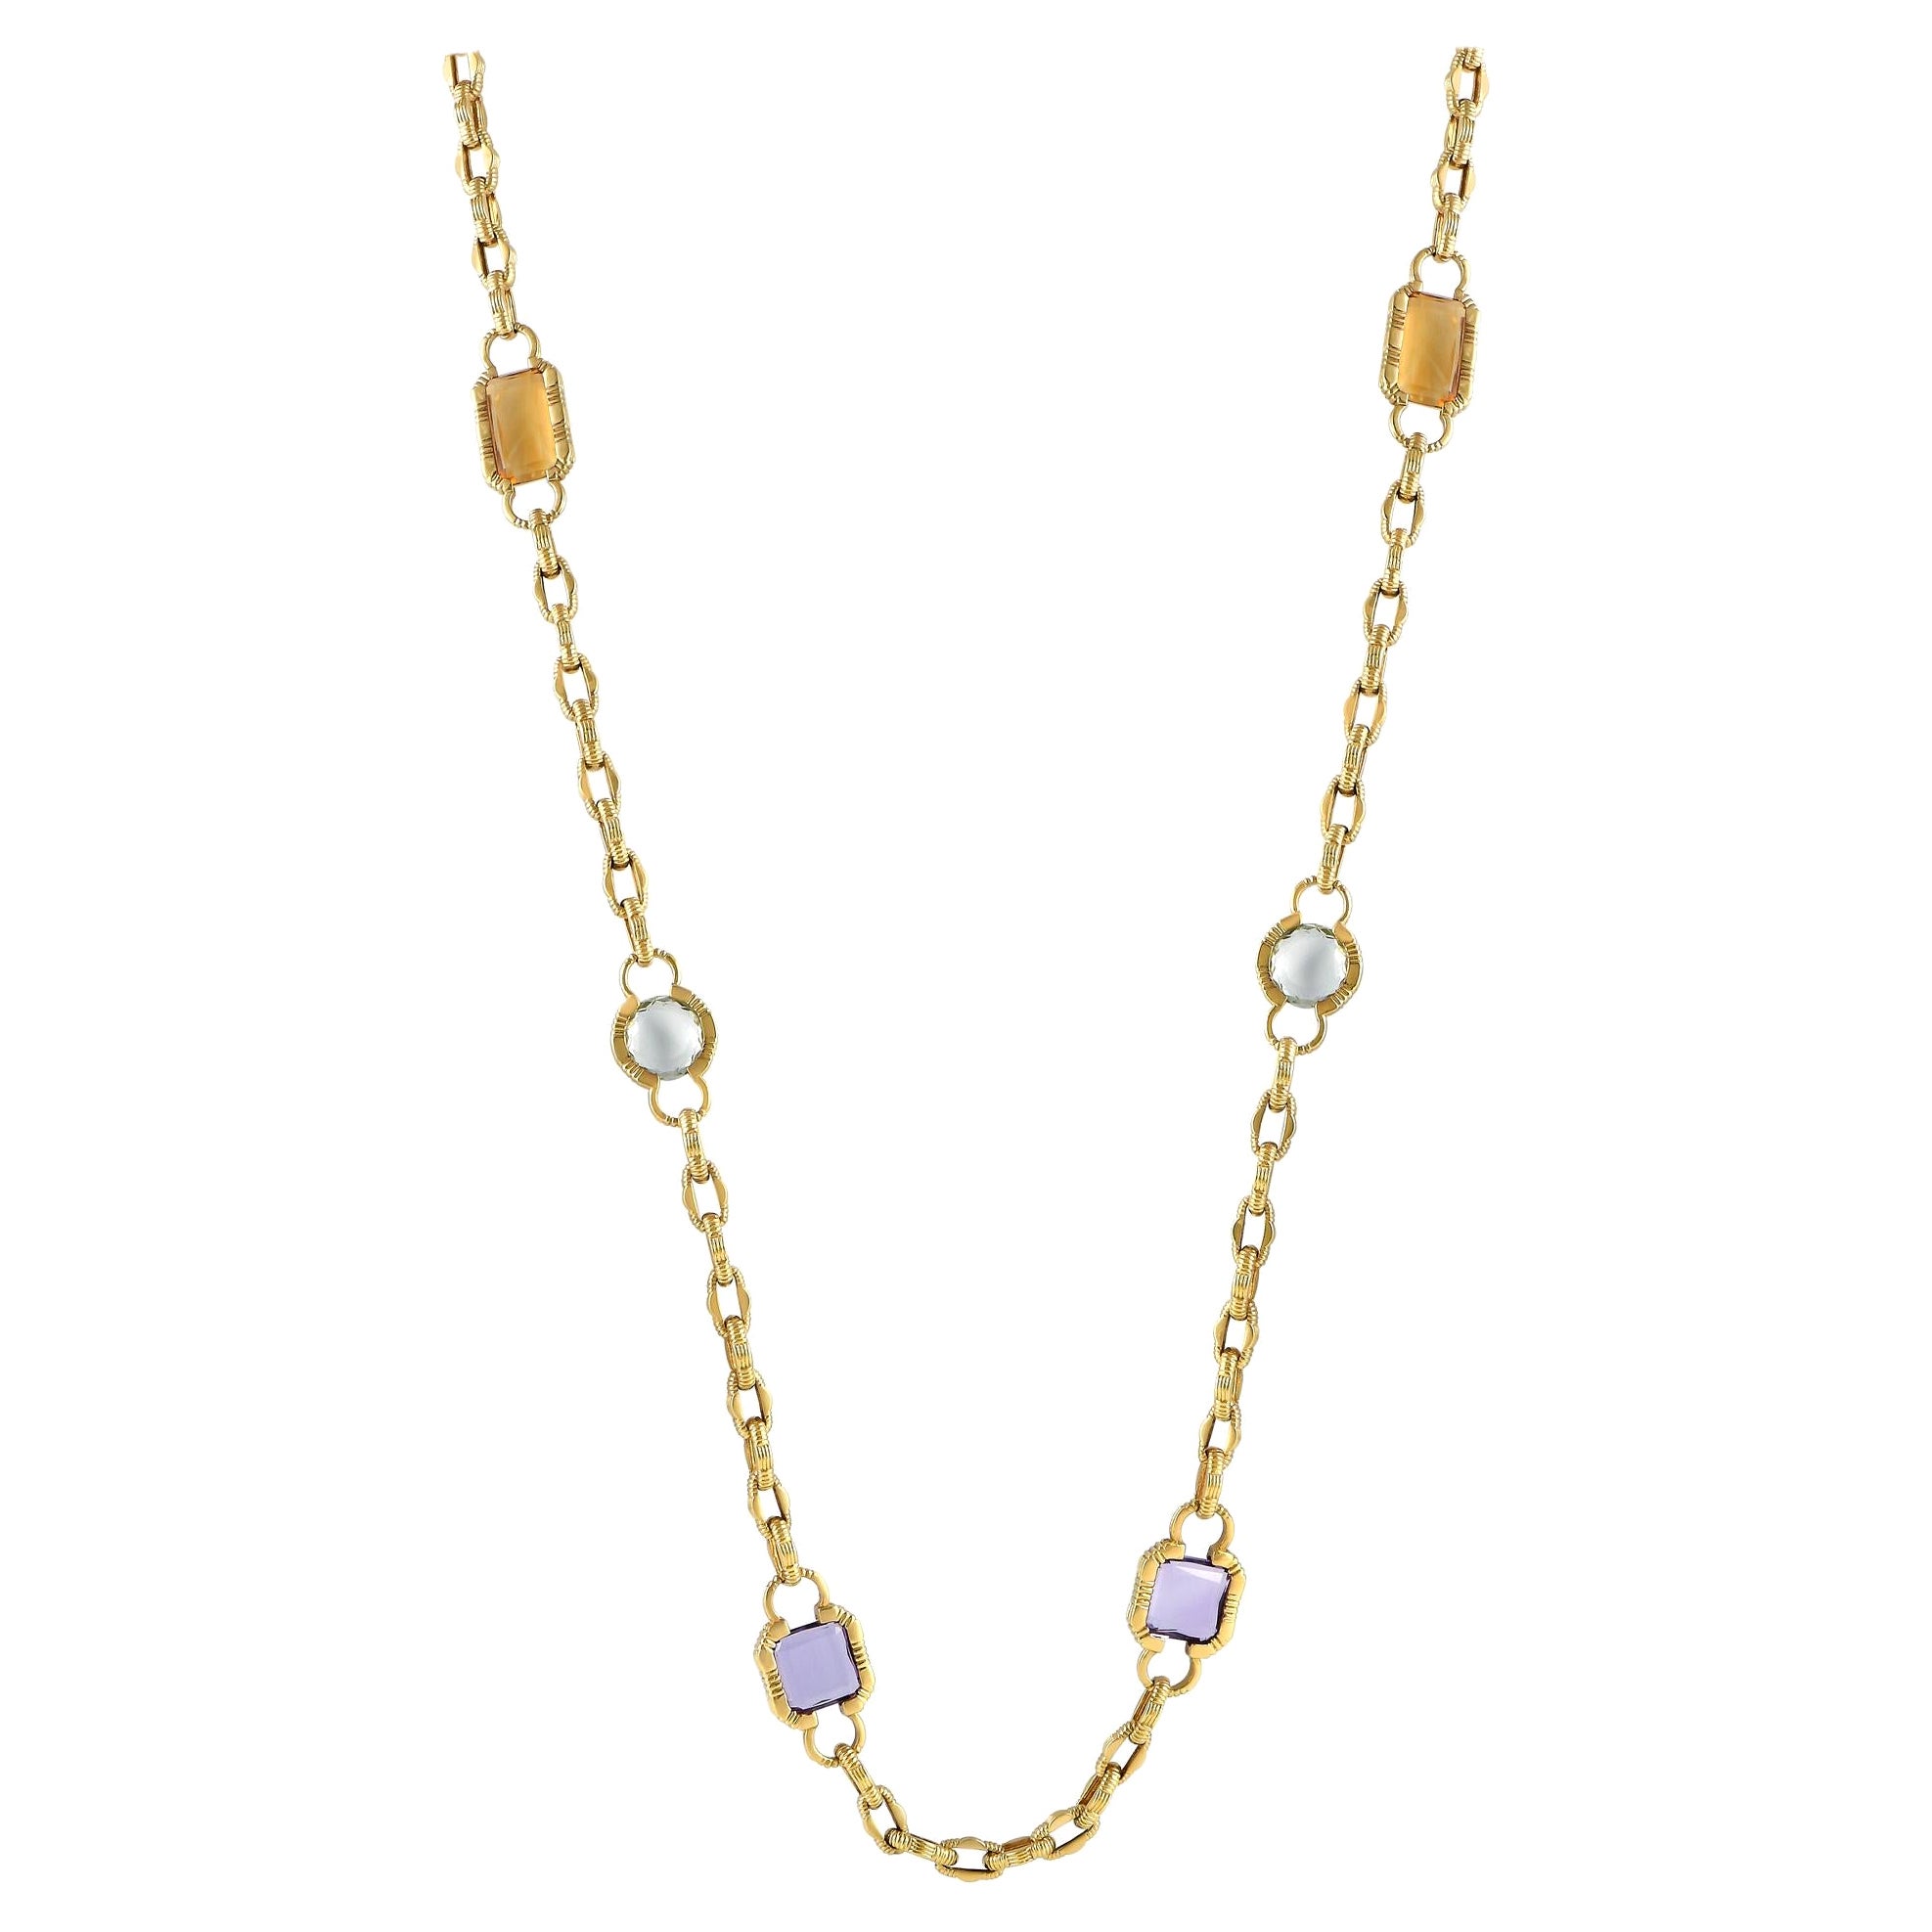 Roberto Coin 18k Yellow Gold Multicolored Gemstone Long Necklace